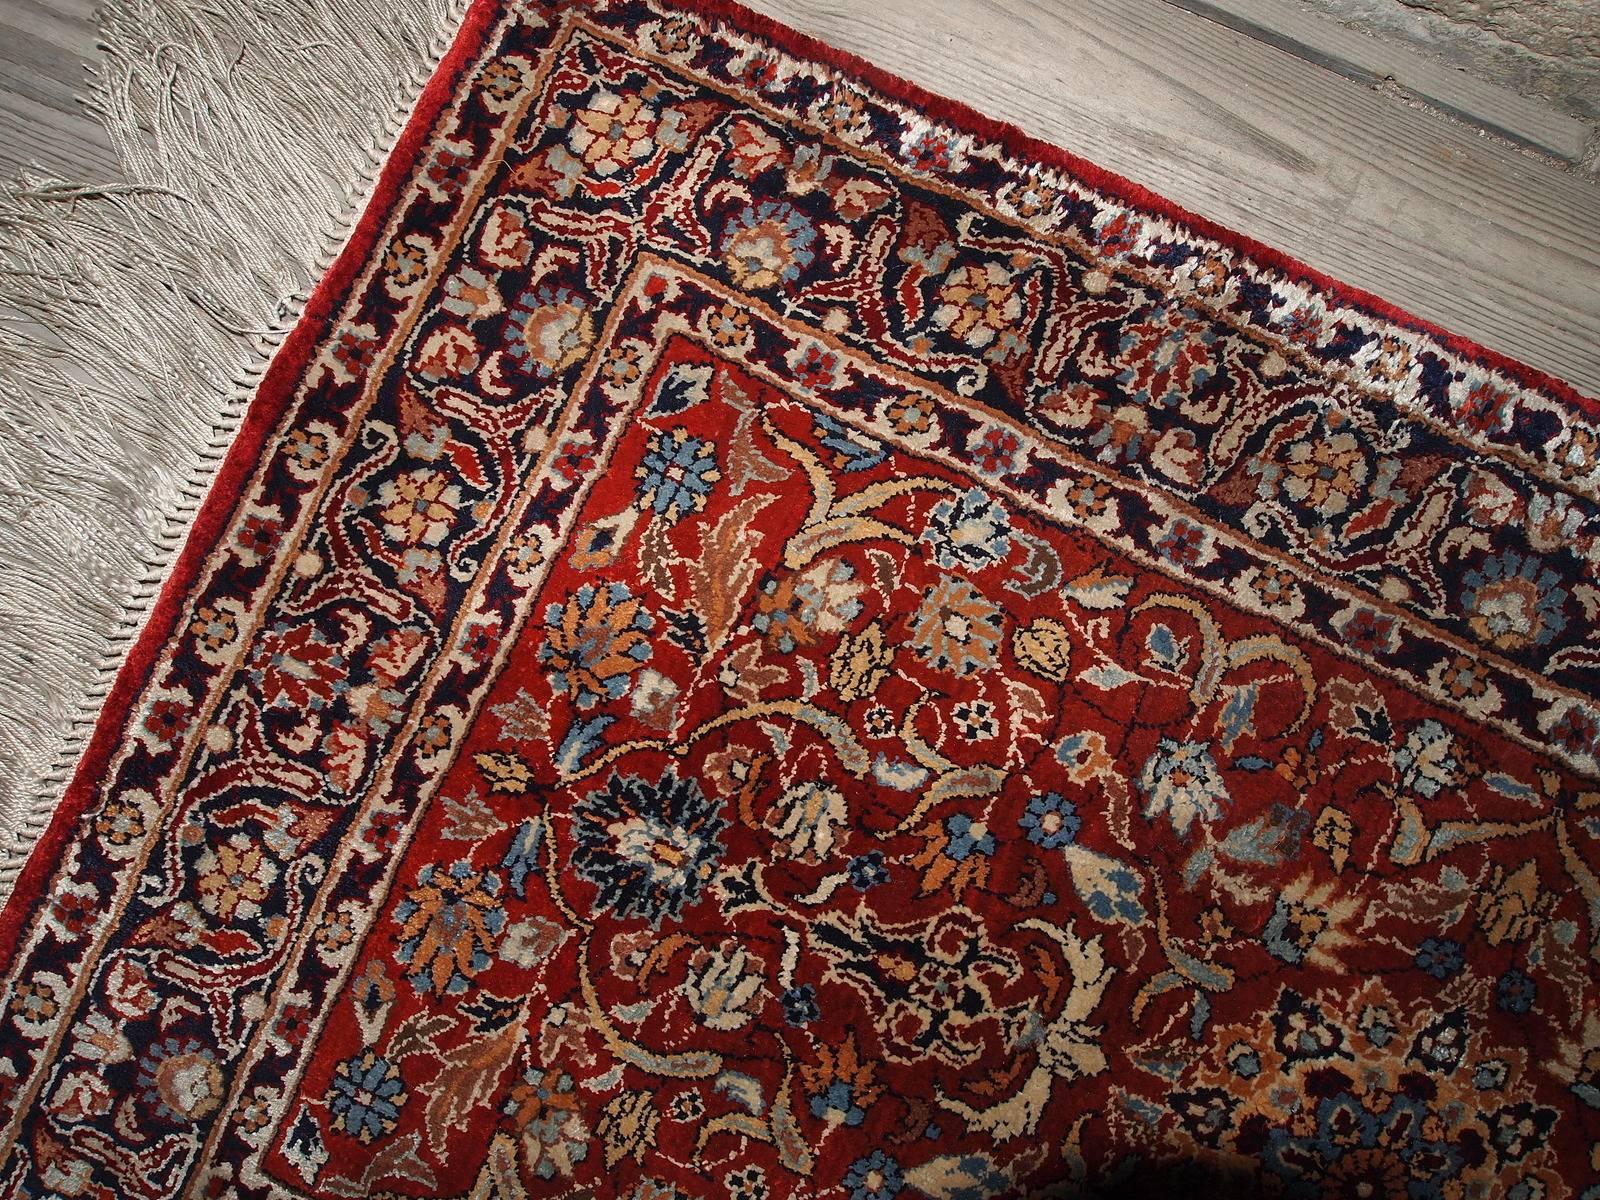 Handmade vintage Indian Qum rug. This rug was made out of silk in amazing bright colors of red, beige and navy blue. It has garden design, highly detailed foliage and flowers spread out all around the carpet. It was made from the silk and can shine